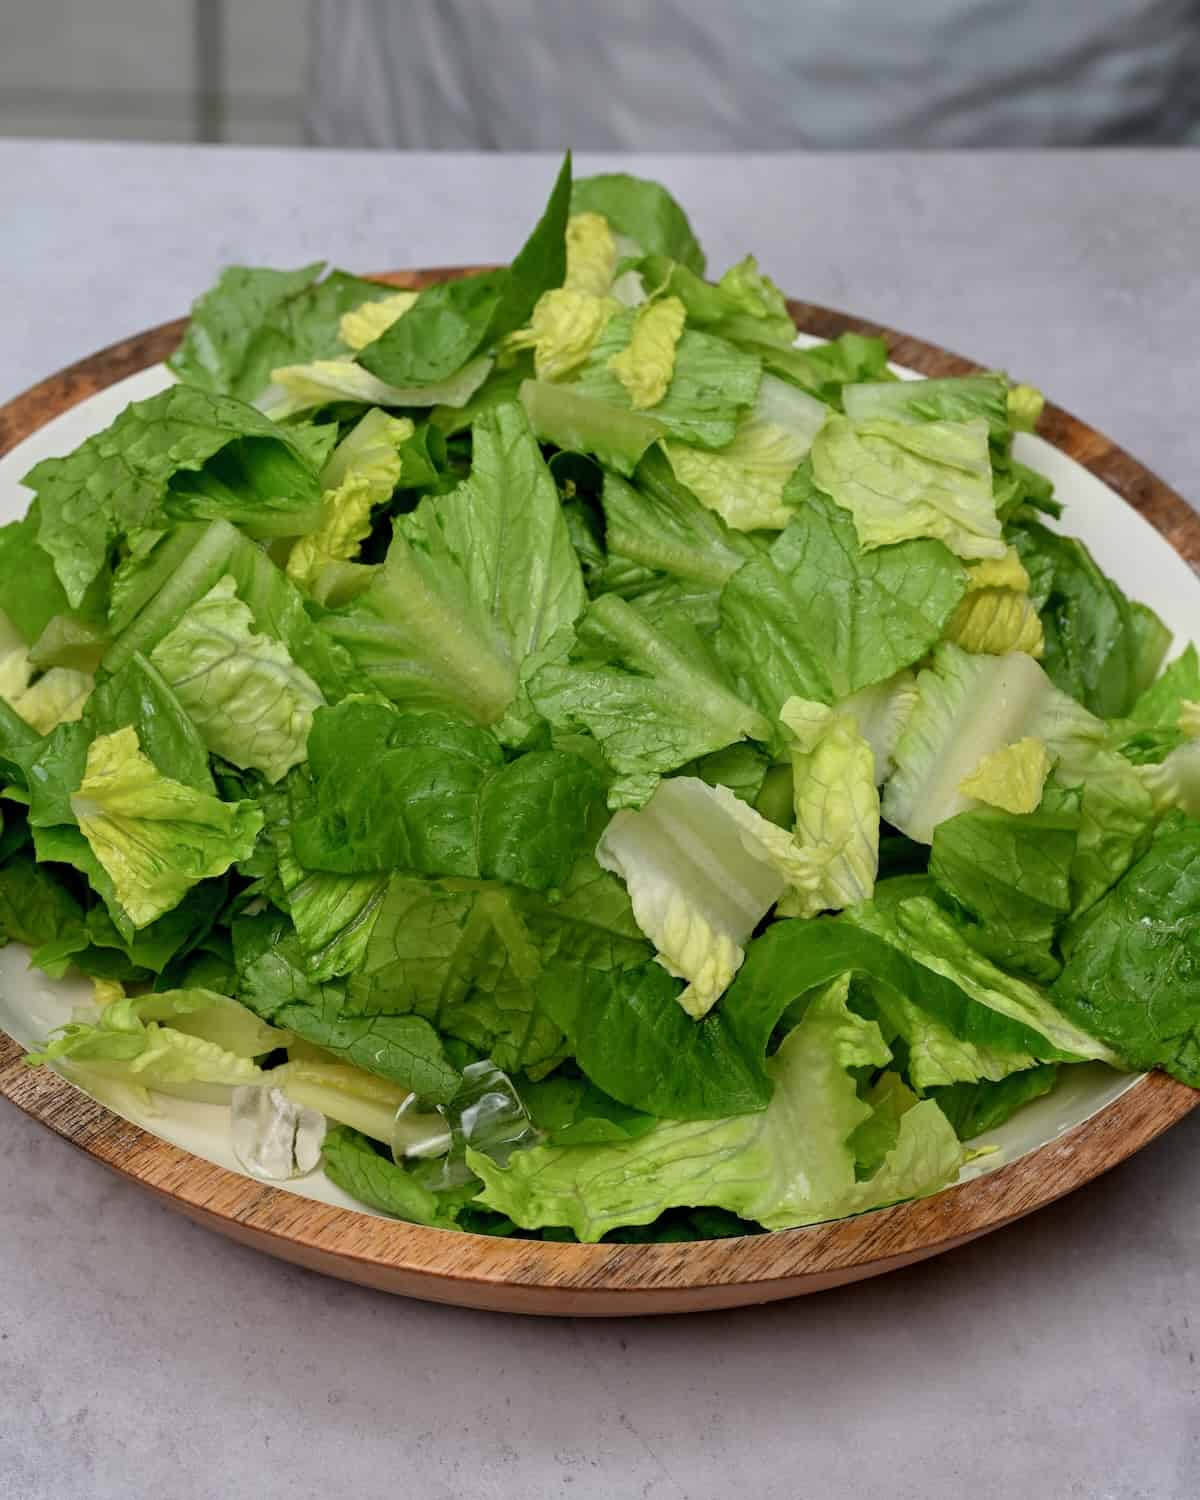 A bowl with cut Romaine lettuce